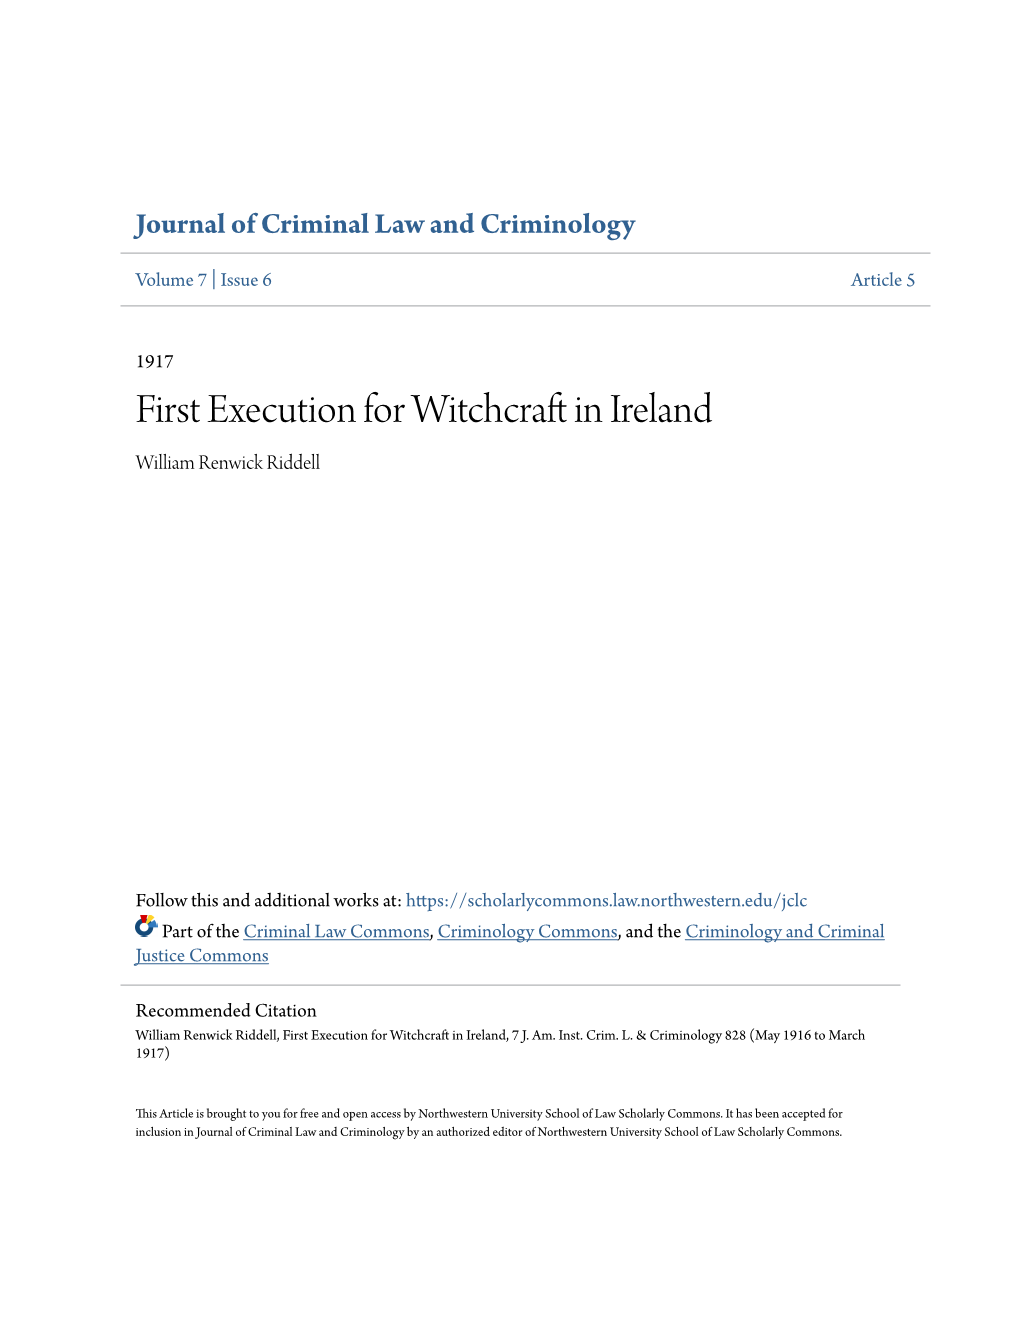 First Execution for Witchcraft in Ireland